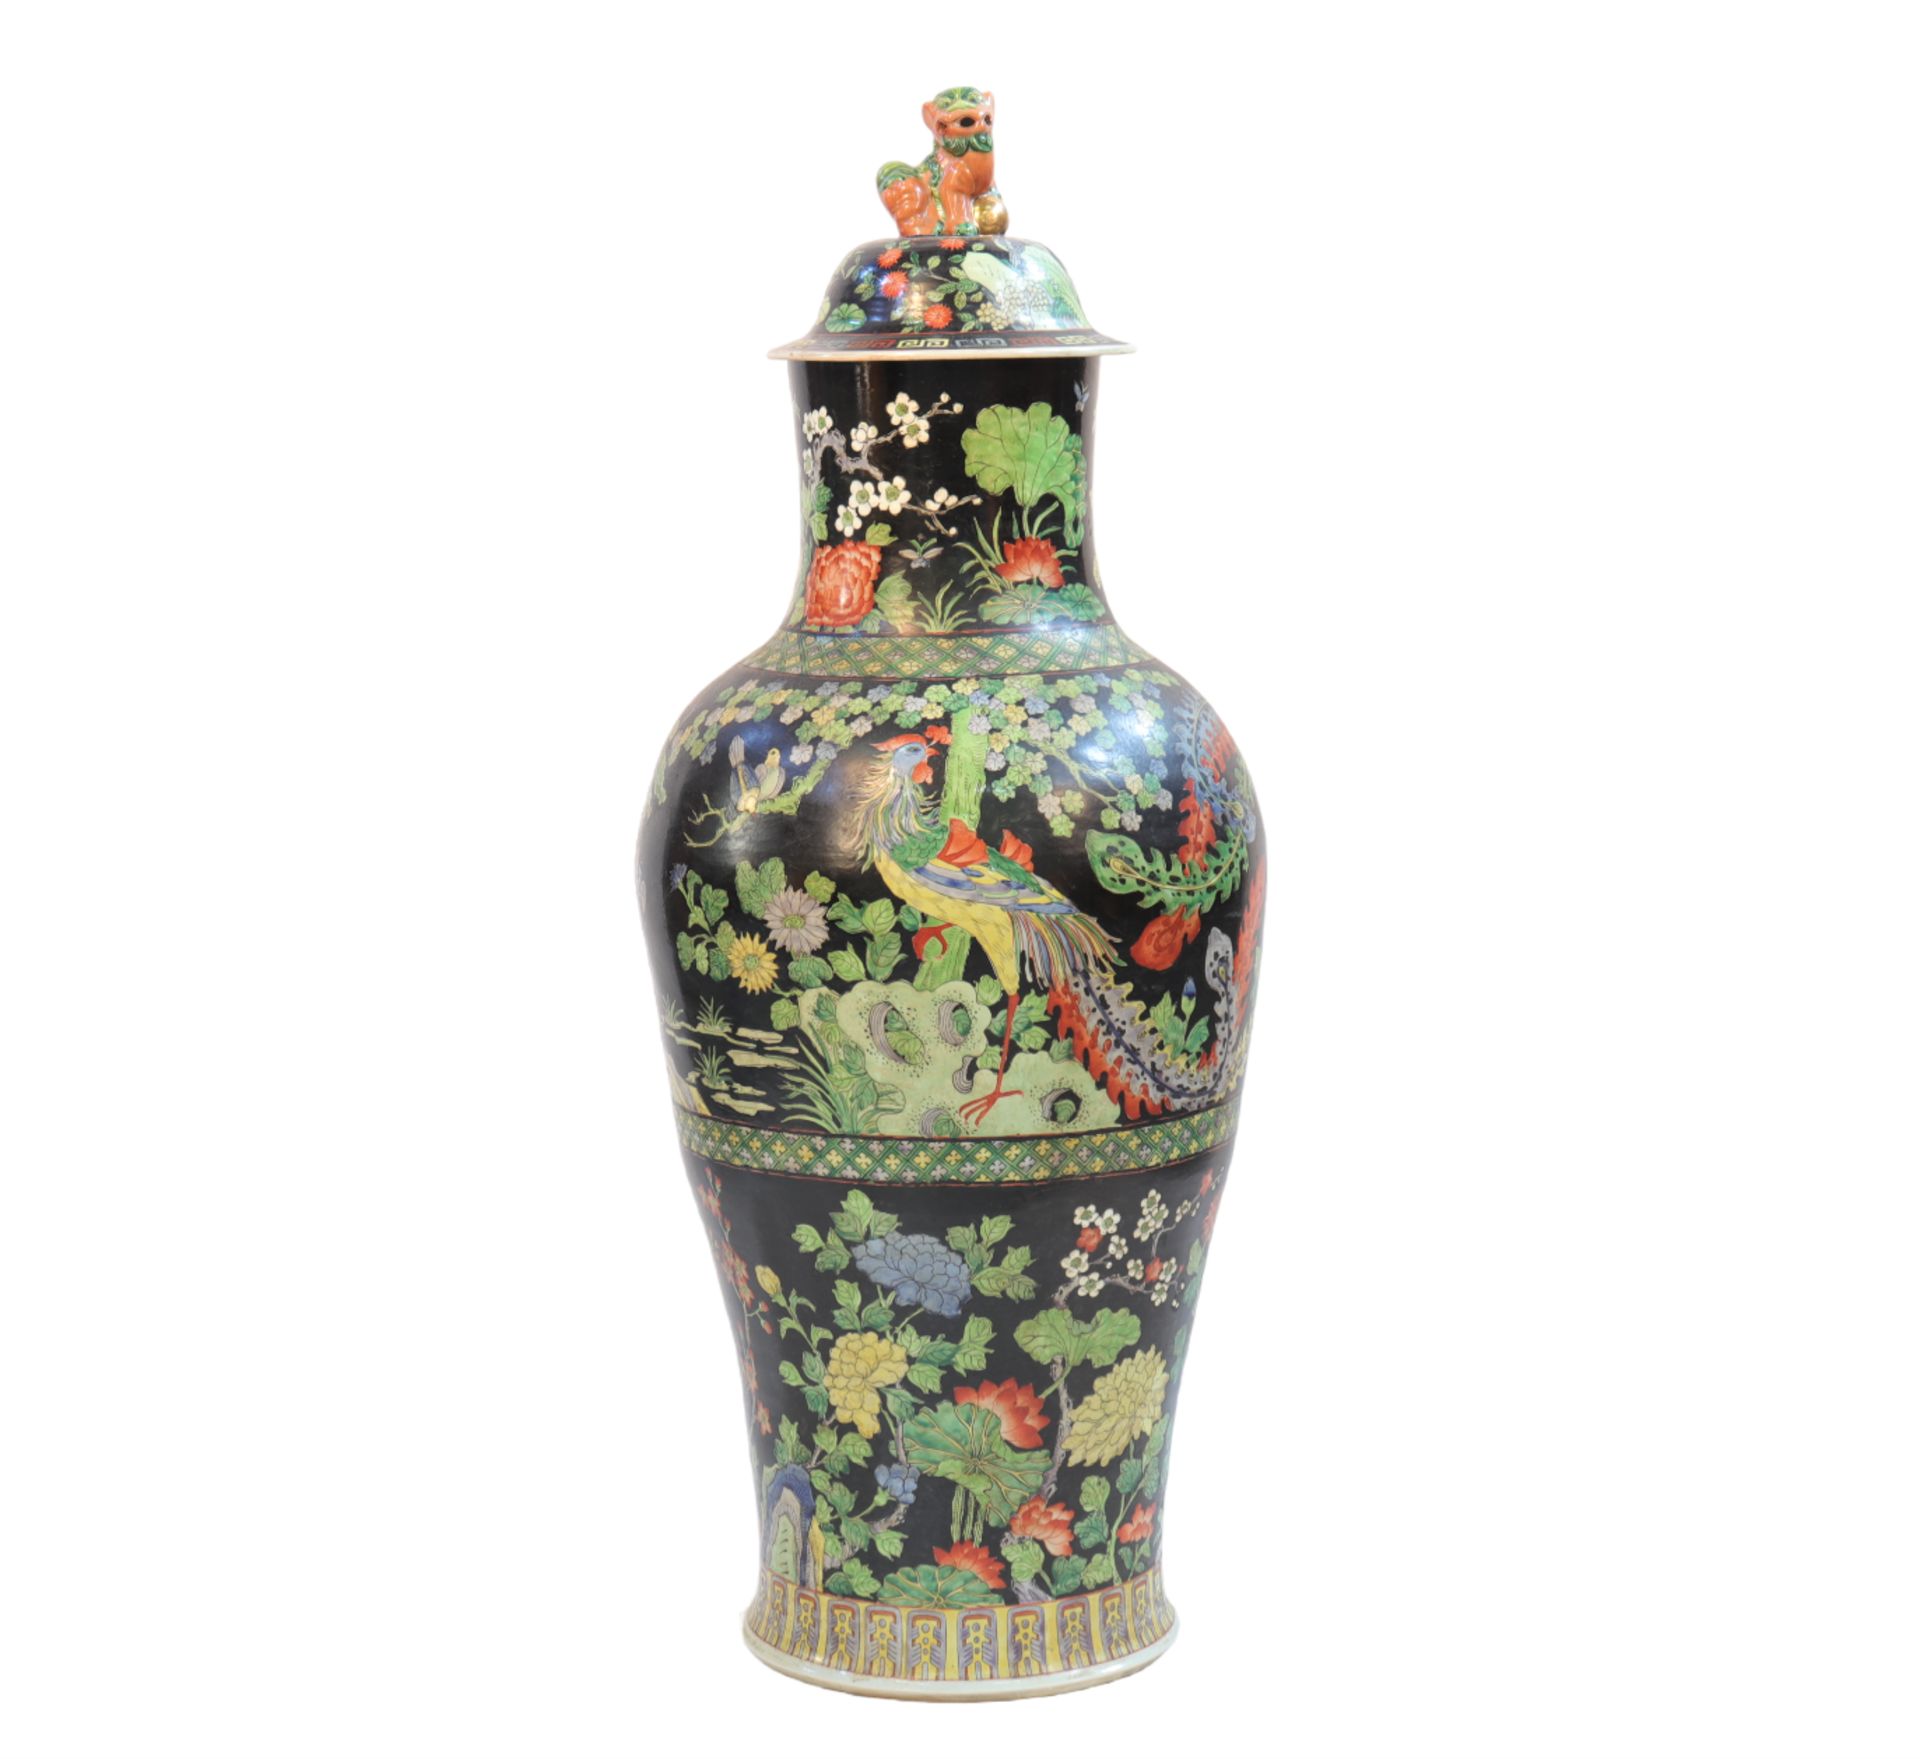 Covered vase from the Famille Noire decorated with flowers and birds from the 19th century - Image 3 of 5